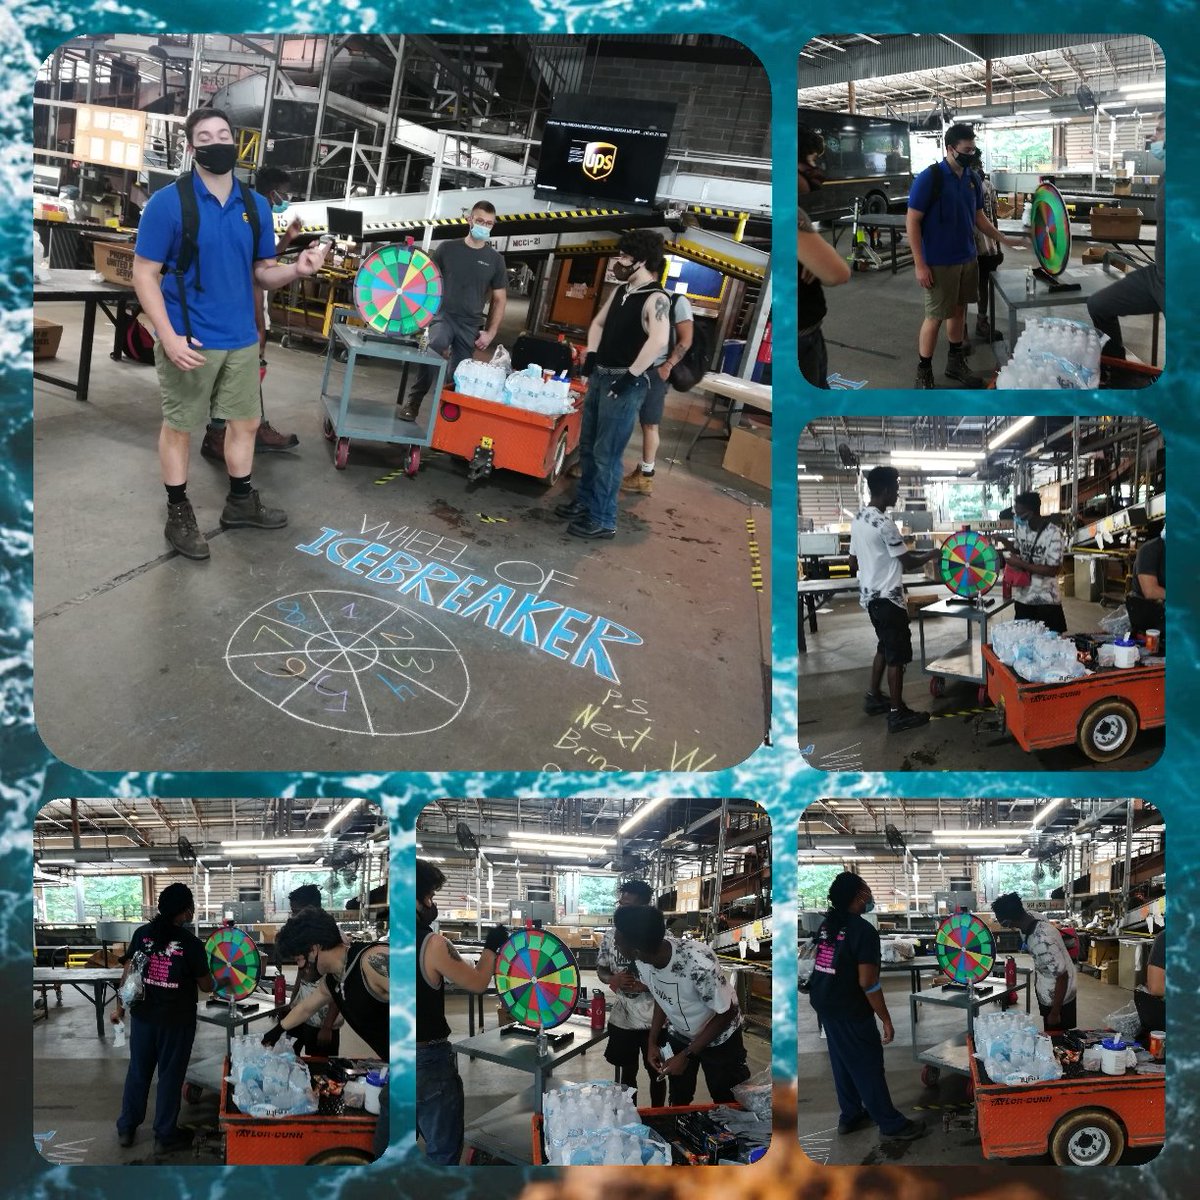 Gaithersburg Twilight CHSP Wellness Activity 'Strength of Bonds, Wheel of Icebreakers'. We had employees spin the wheel and both the employee and CHSP member answered to see what they had in common. The employees enjoyed the activity. @BylePhil @MattDow96152606 @nick_iannacone2